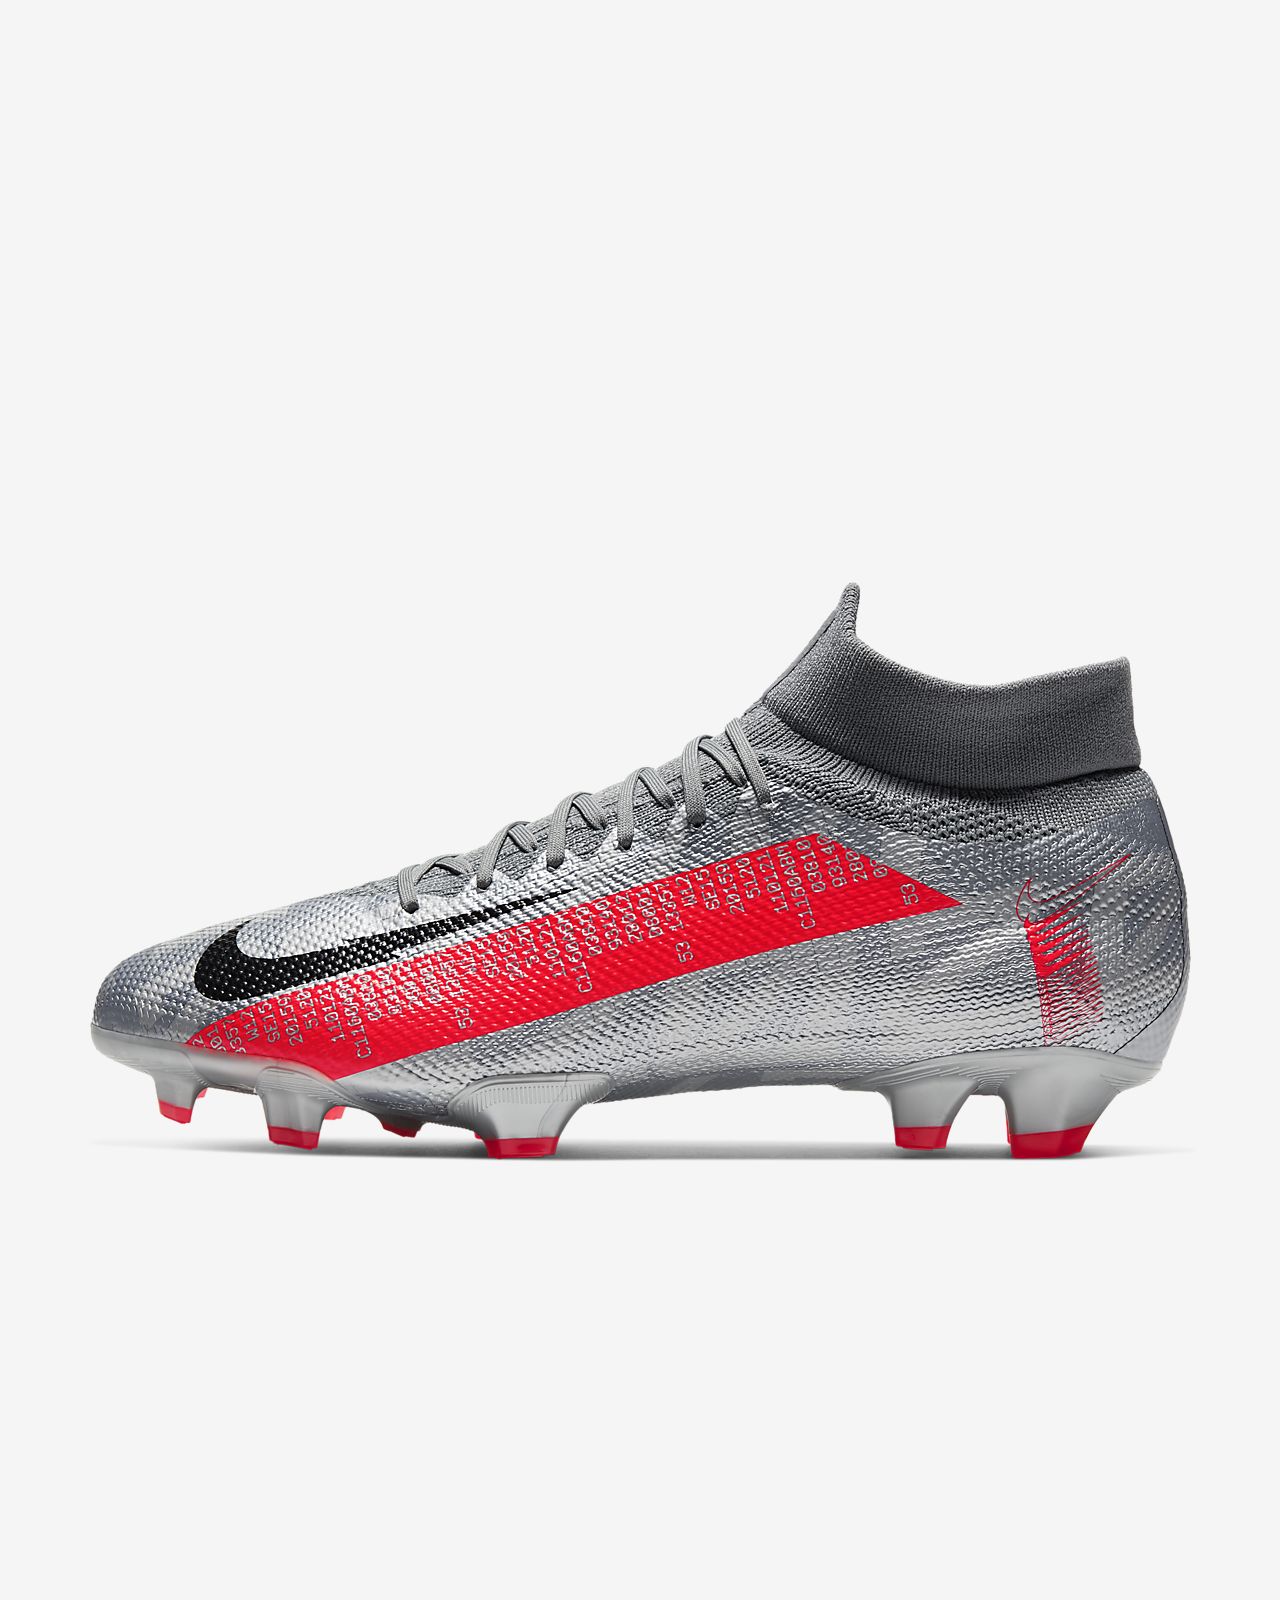 Nike Mercurial Superfly 7 Pro Fg Firm Ground Soccer Cleat Nike Com